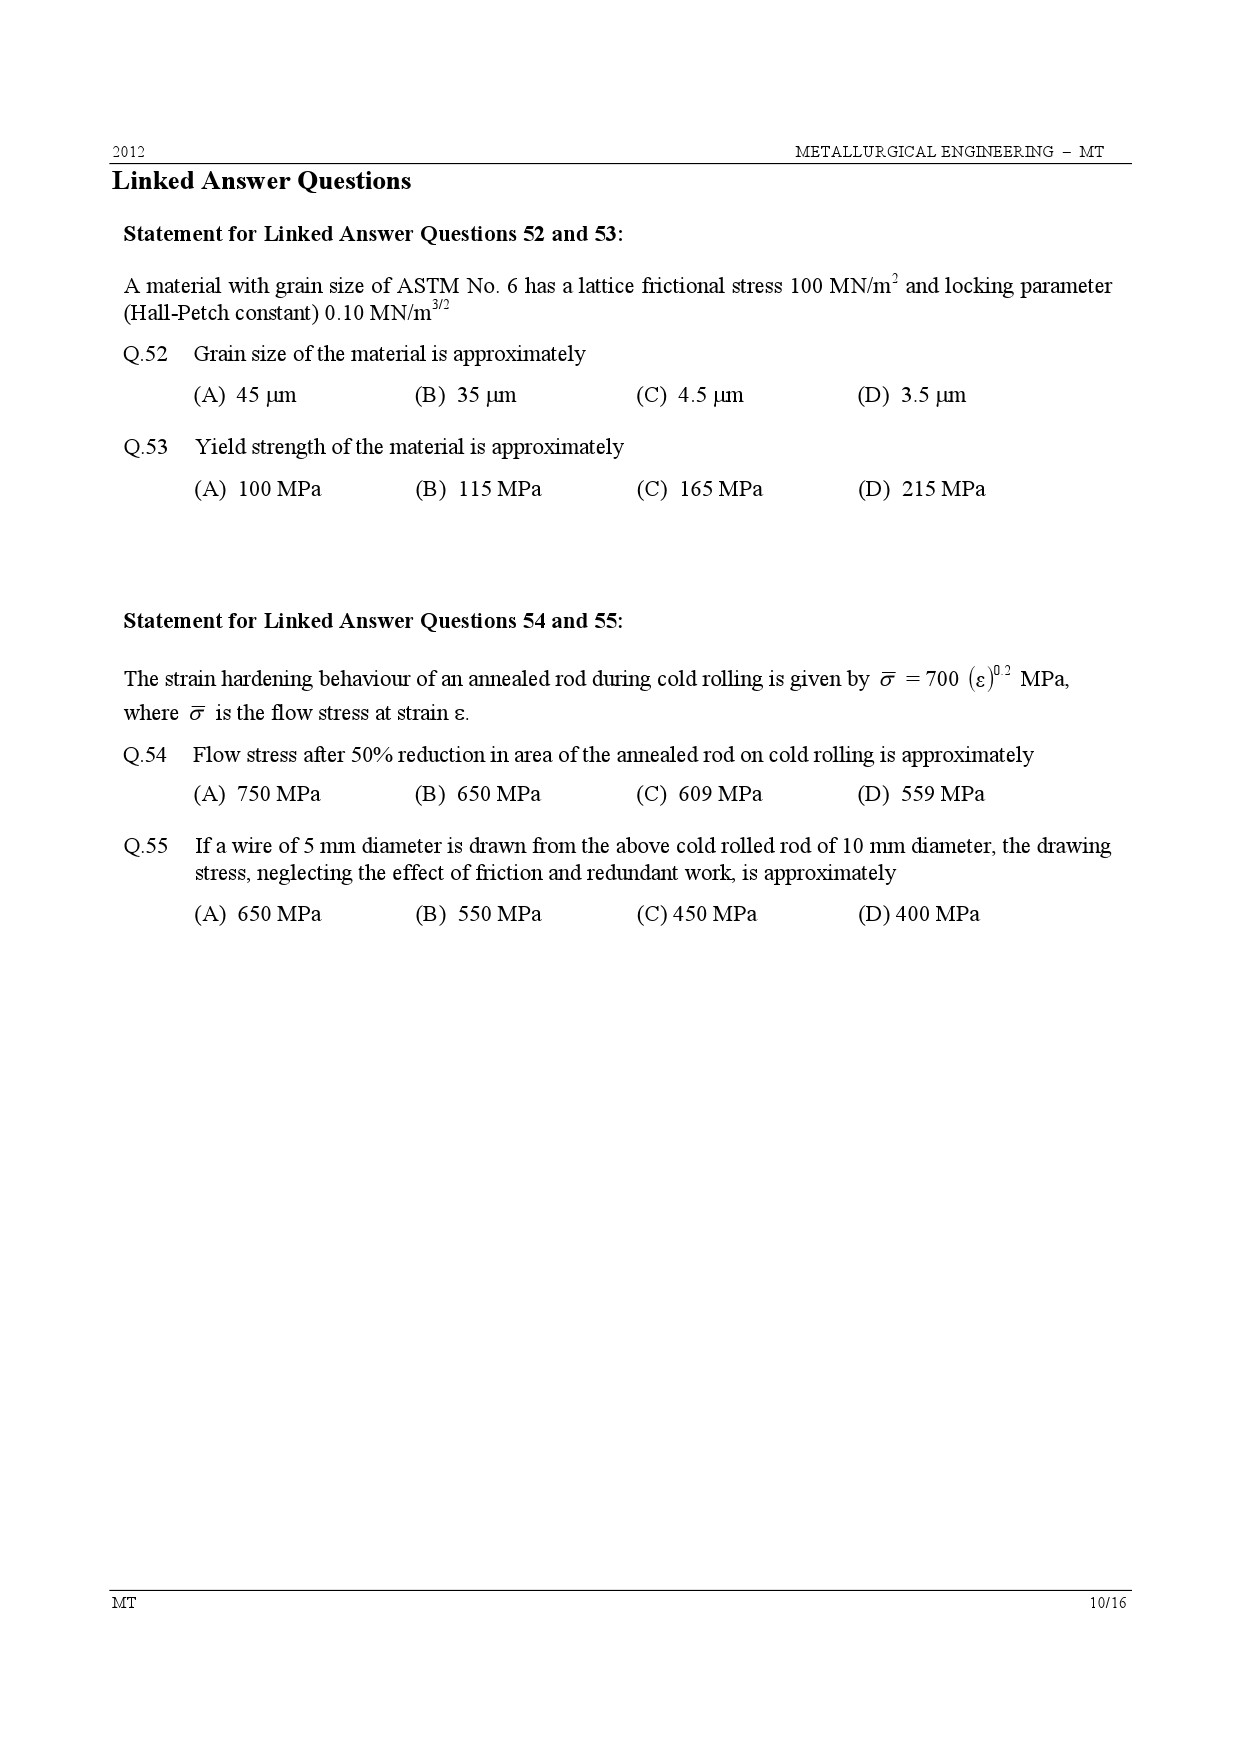 GATE Exam Question Paper 2012 Metallurgical Engineering 10